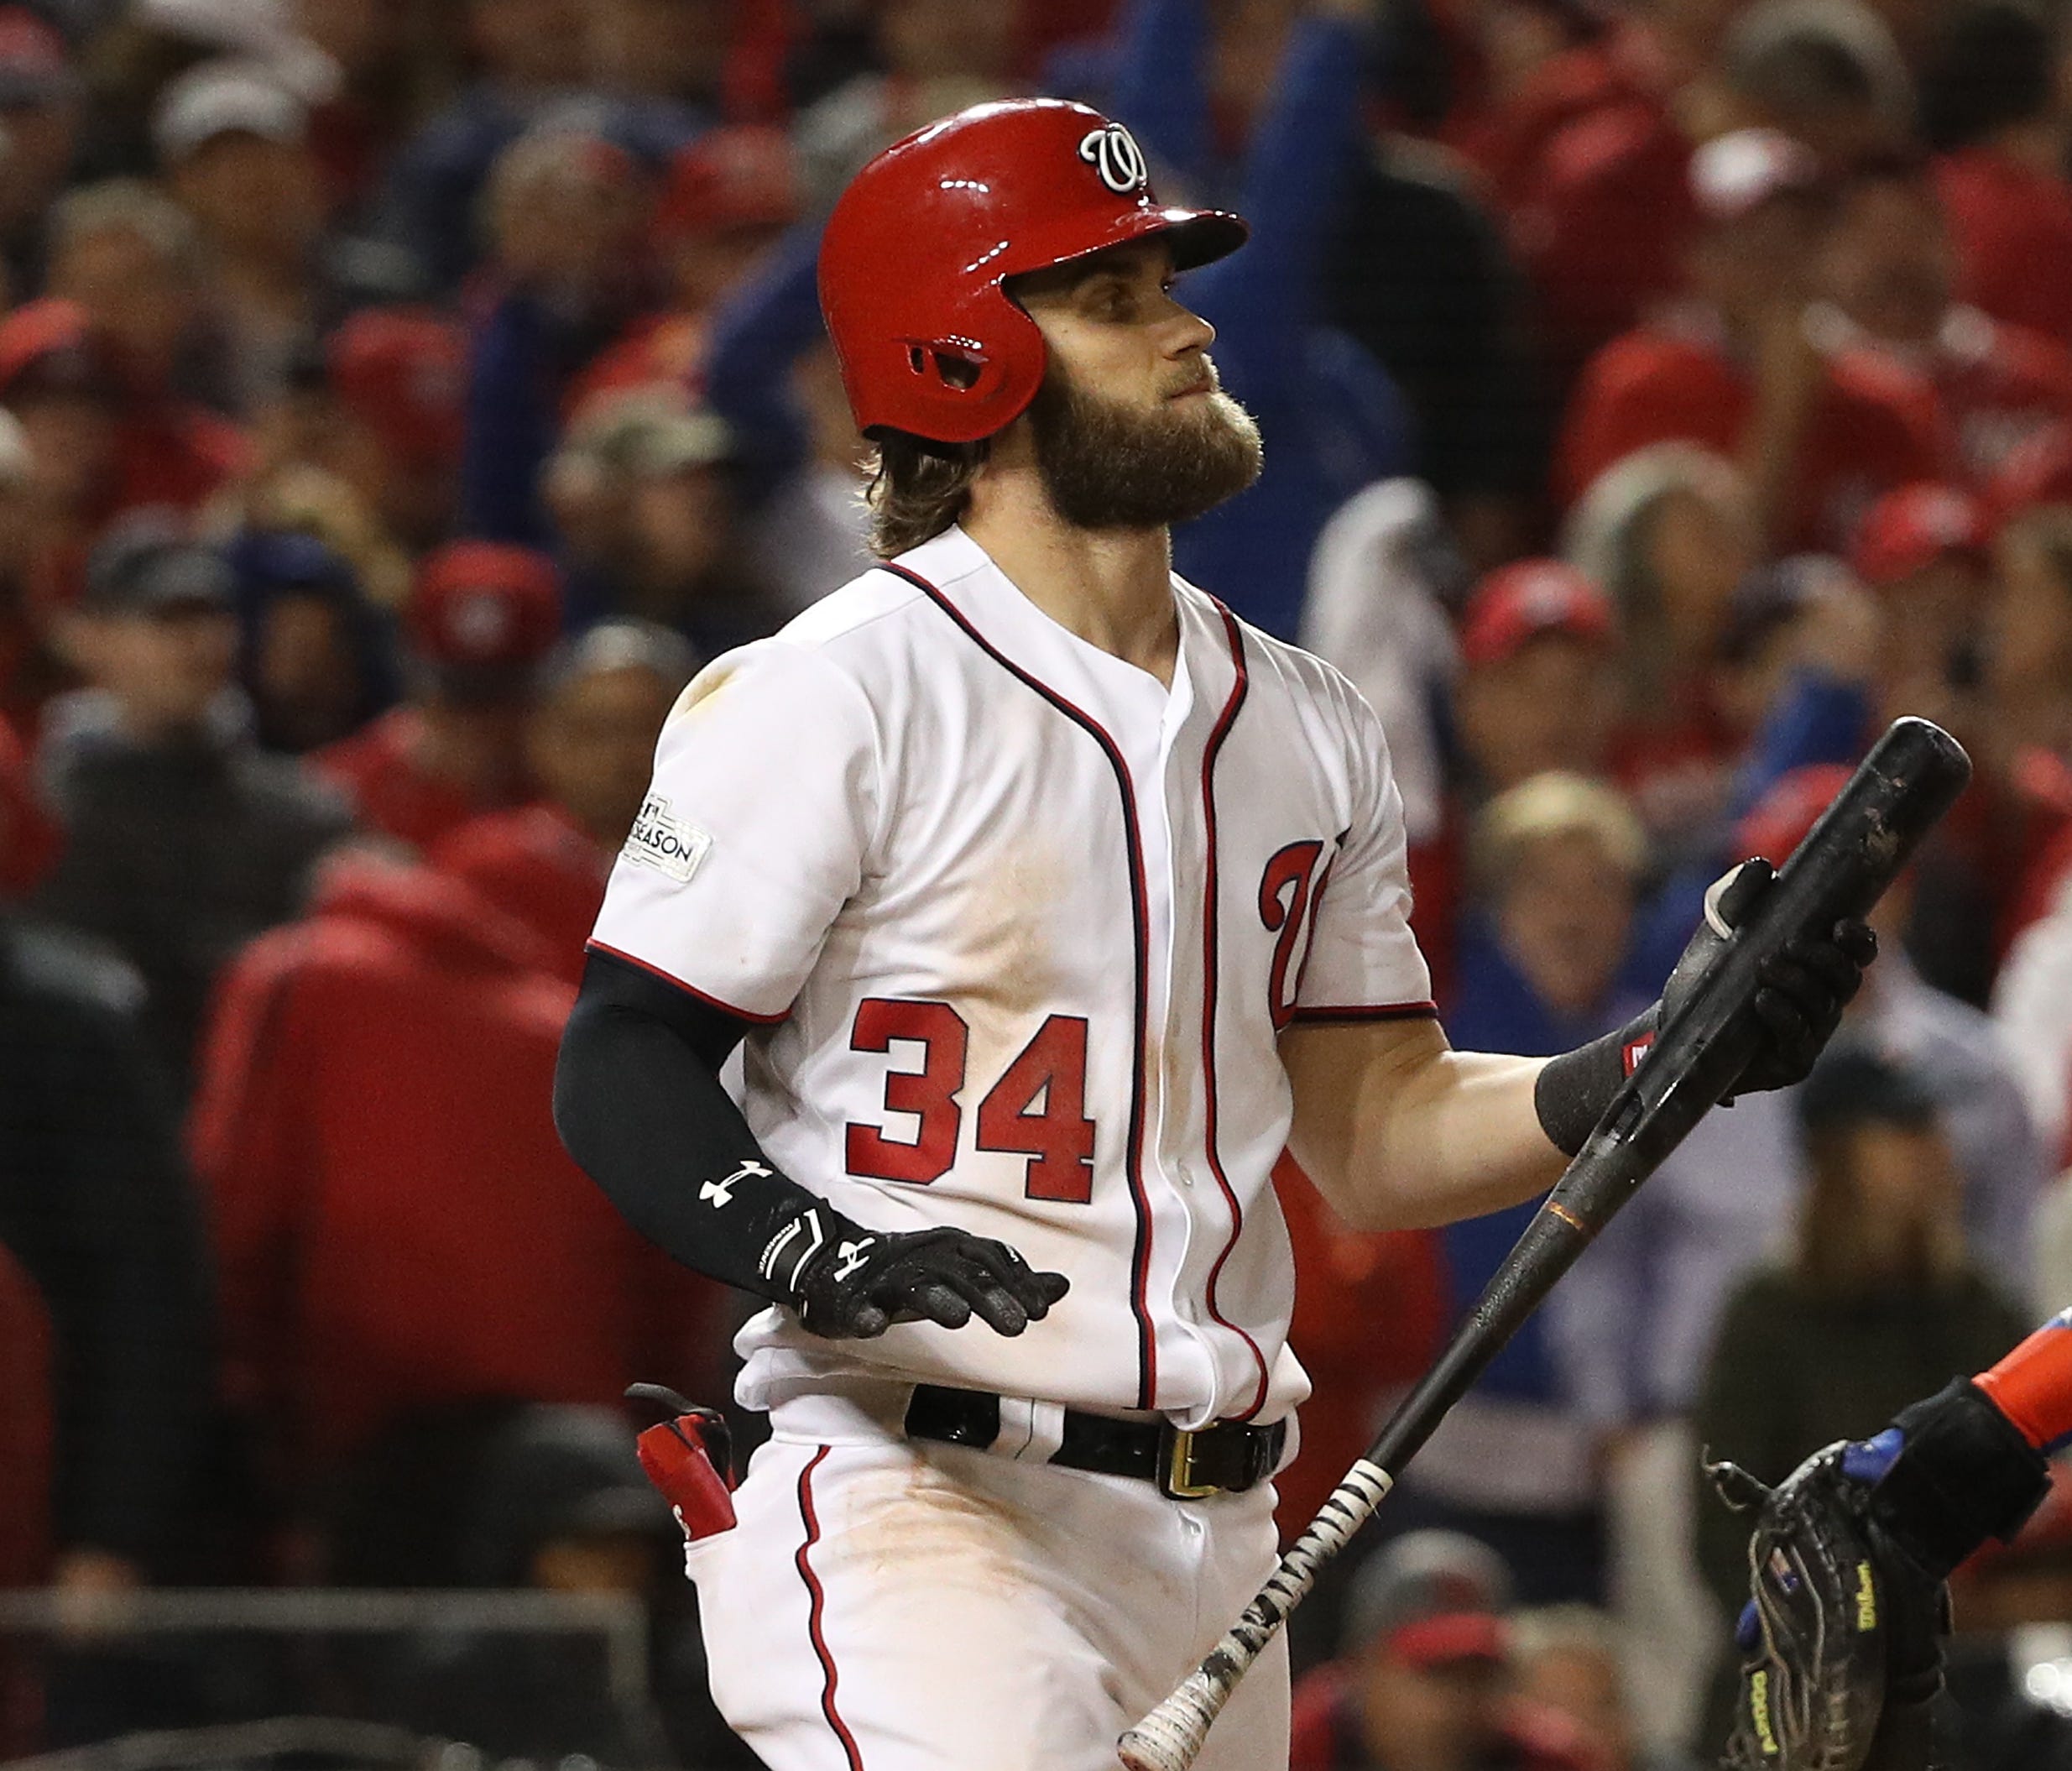 Bryce Harper struck out to end the game.